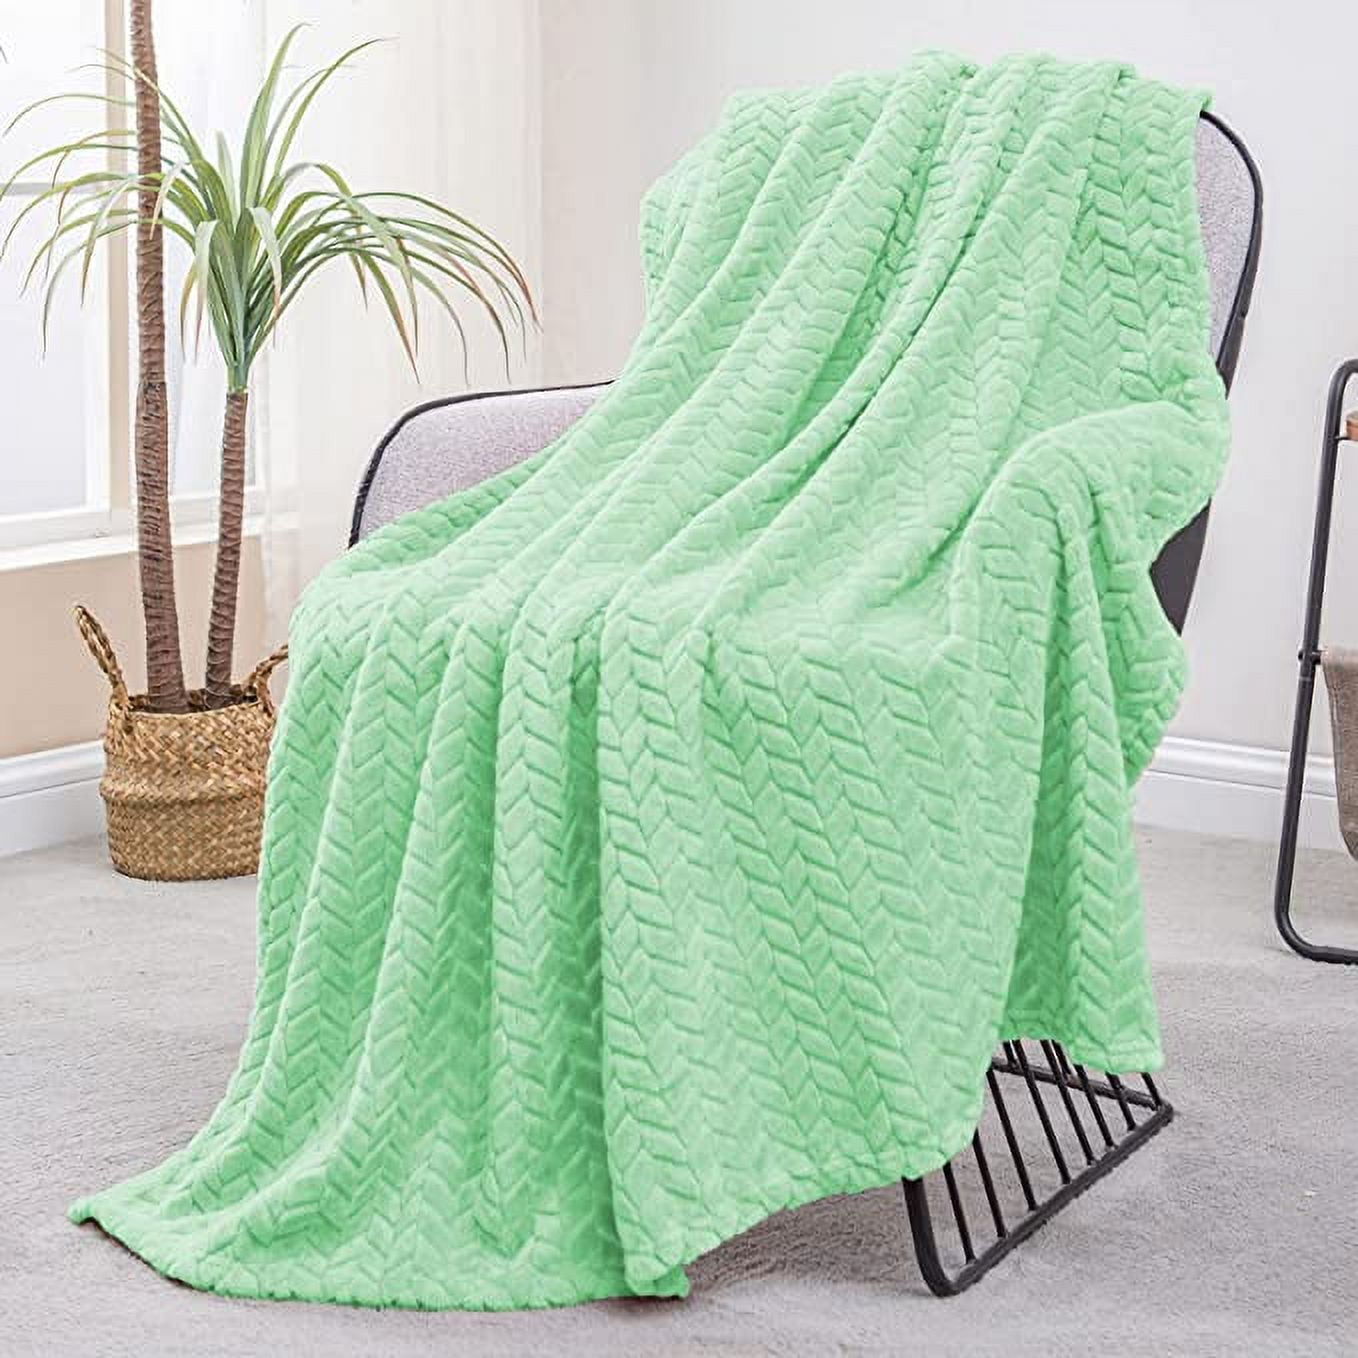 Exclusivo Mezcla Large Flannel Fleece Throw Blanket, Jacquard Weave Leaves Pattern (50" x 70",Mint) - Soft, Warm, Lightweight and Decorative